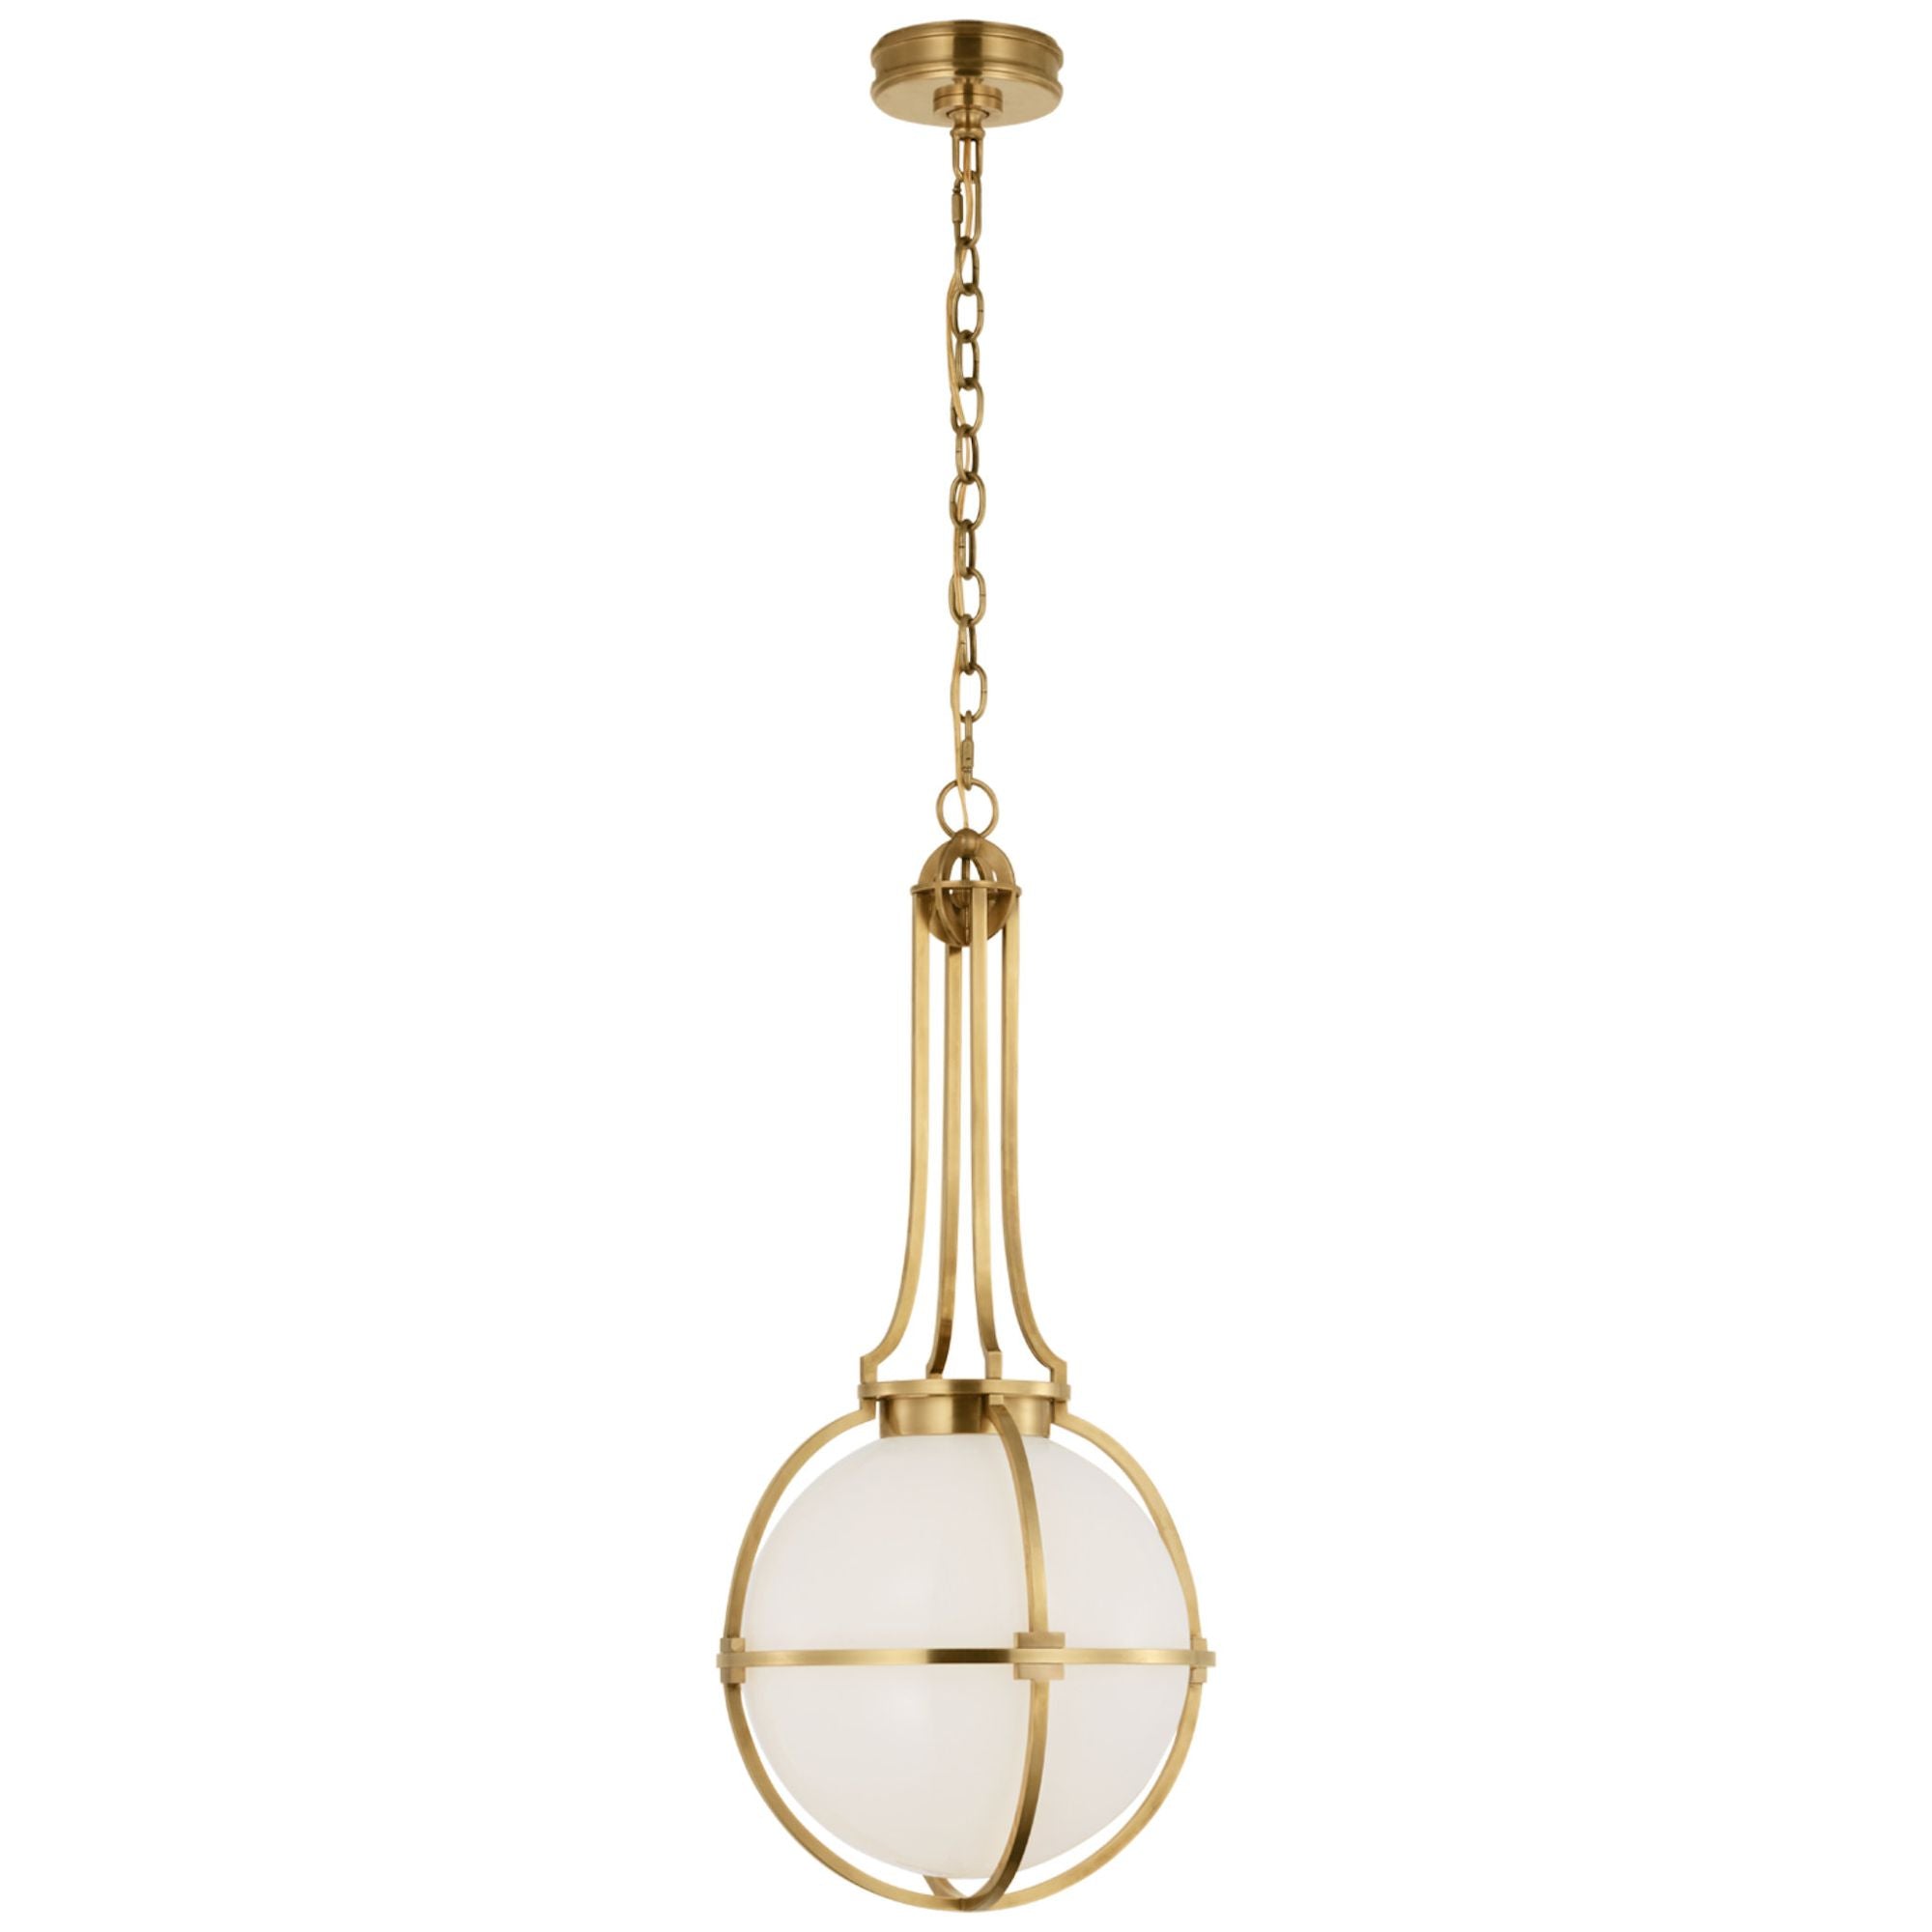 Chapman & Myers Gracie Medium Captured Globe Pendant in Antique-Burnished Brass with White Glass